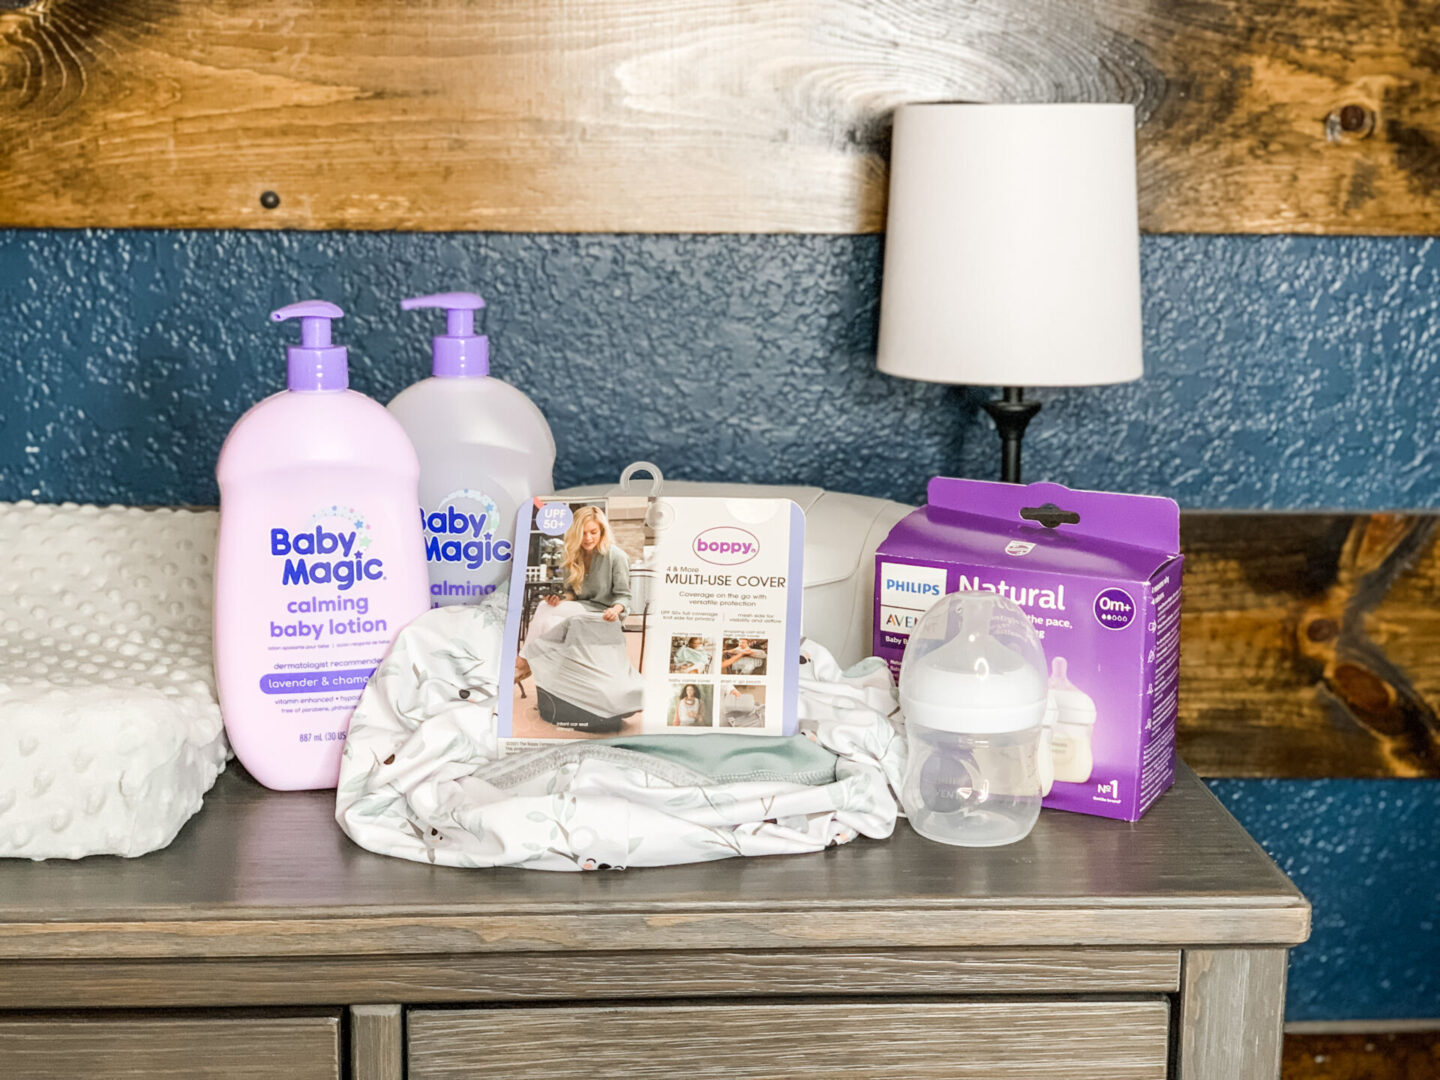 Current Baby Favorites // Newborn Essentials // Infant Essentials // Baby Must Haves | Beauty With Lily | #ad #NewYearNewMomBBxx #lovewithbabymagic #boppy #philipsavent #firsttimemom #momlifestyle 